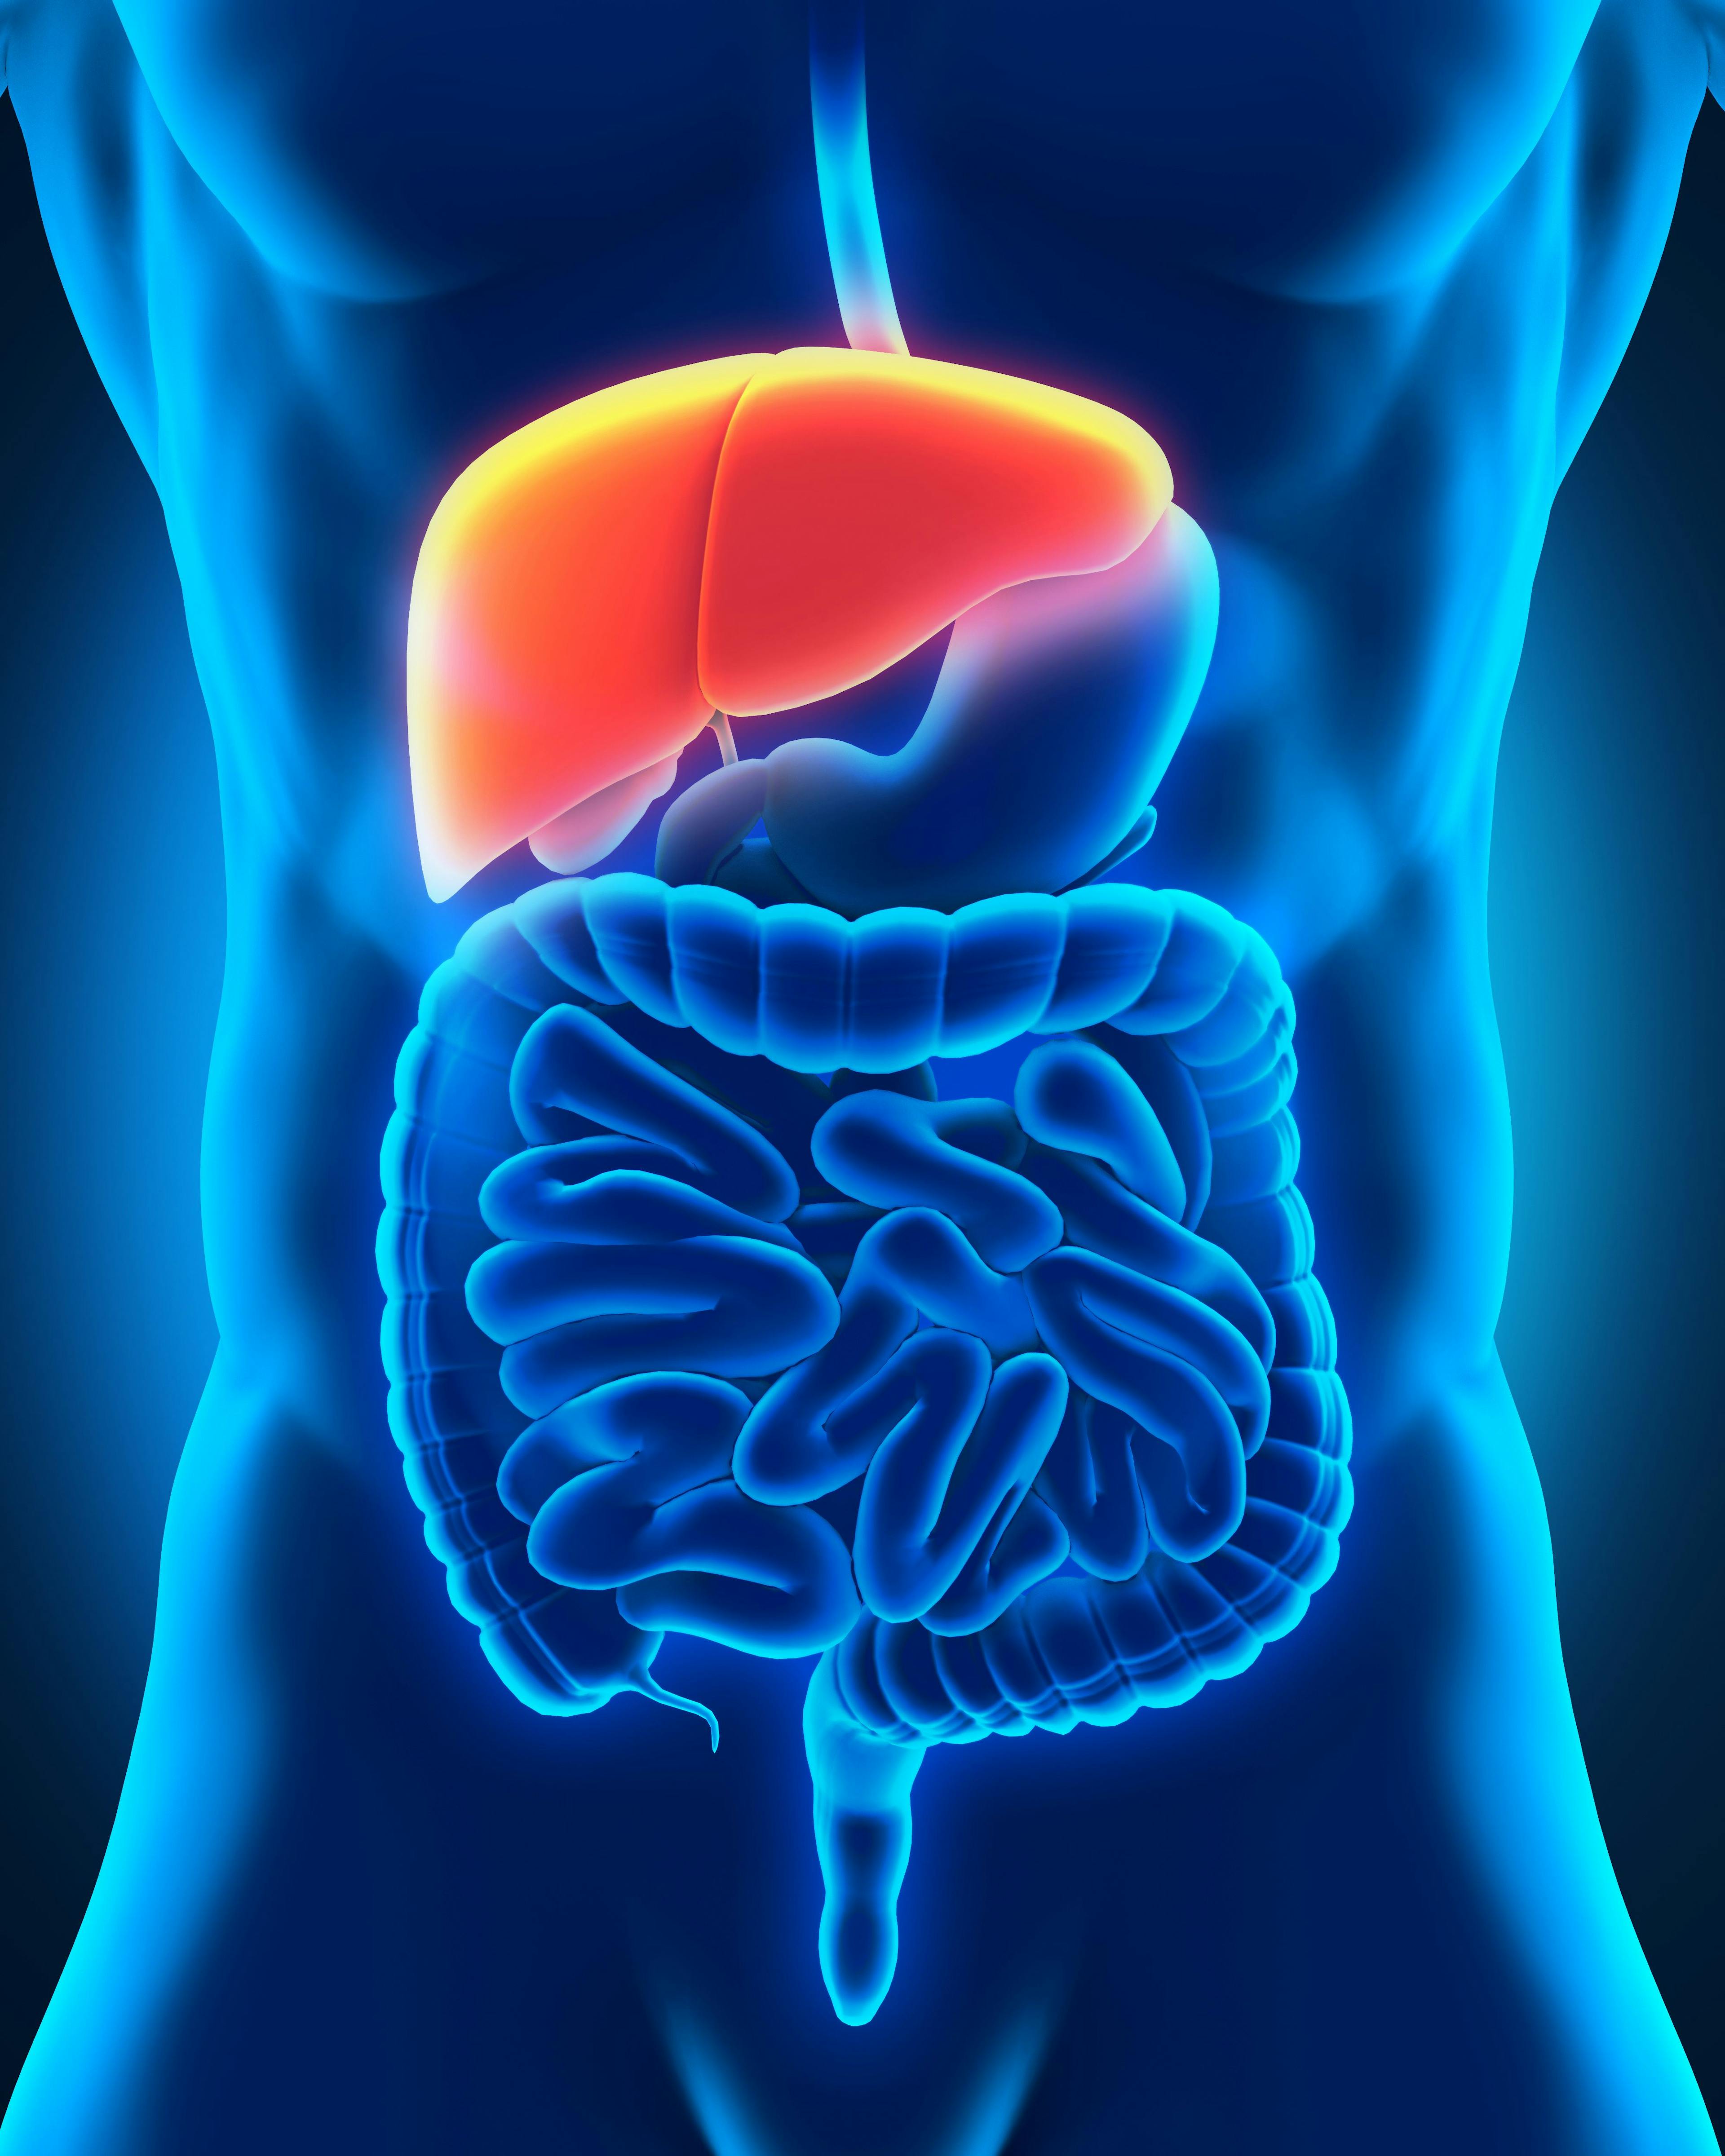 Data from 10 new randomized clinical trials support updated recommendations for various systemic therapy regimens in hepatocellular carcinoma.